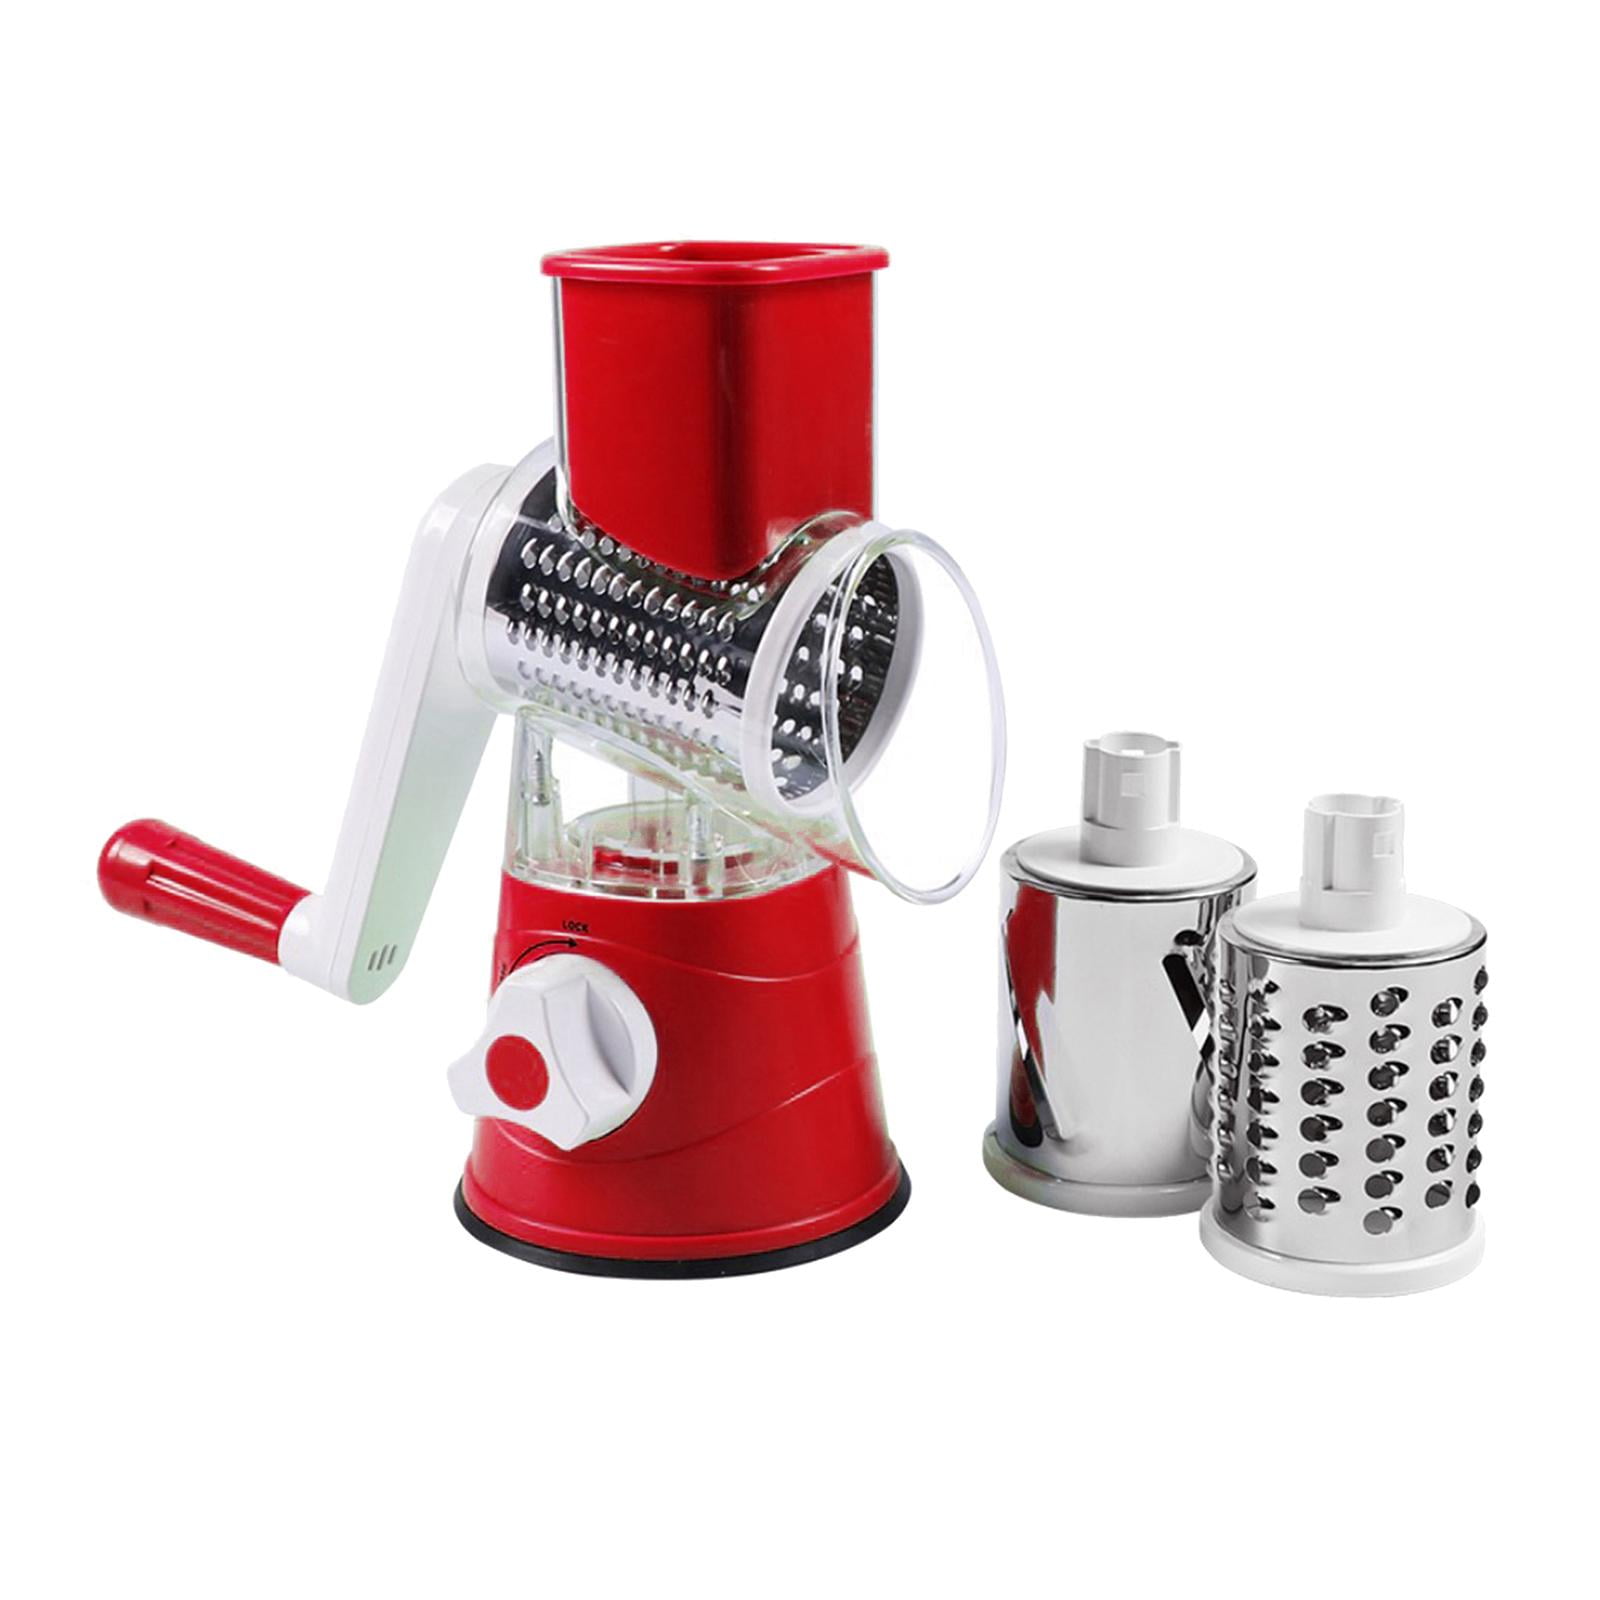 Muti-funtion Vegetable Cutter Rolling Machine Fruit Cutter Hand-operated  Roller Shreding Grinding Slicing Tools